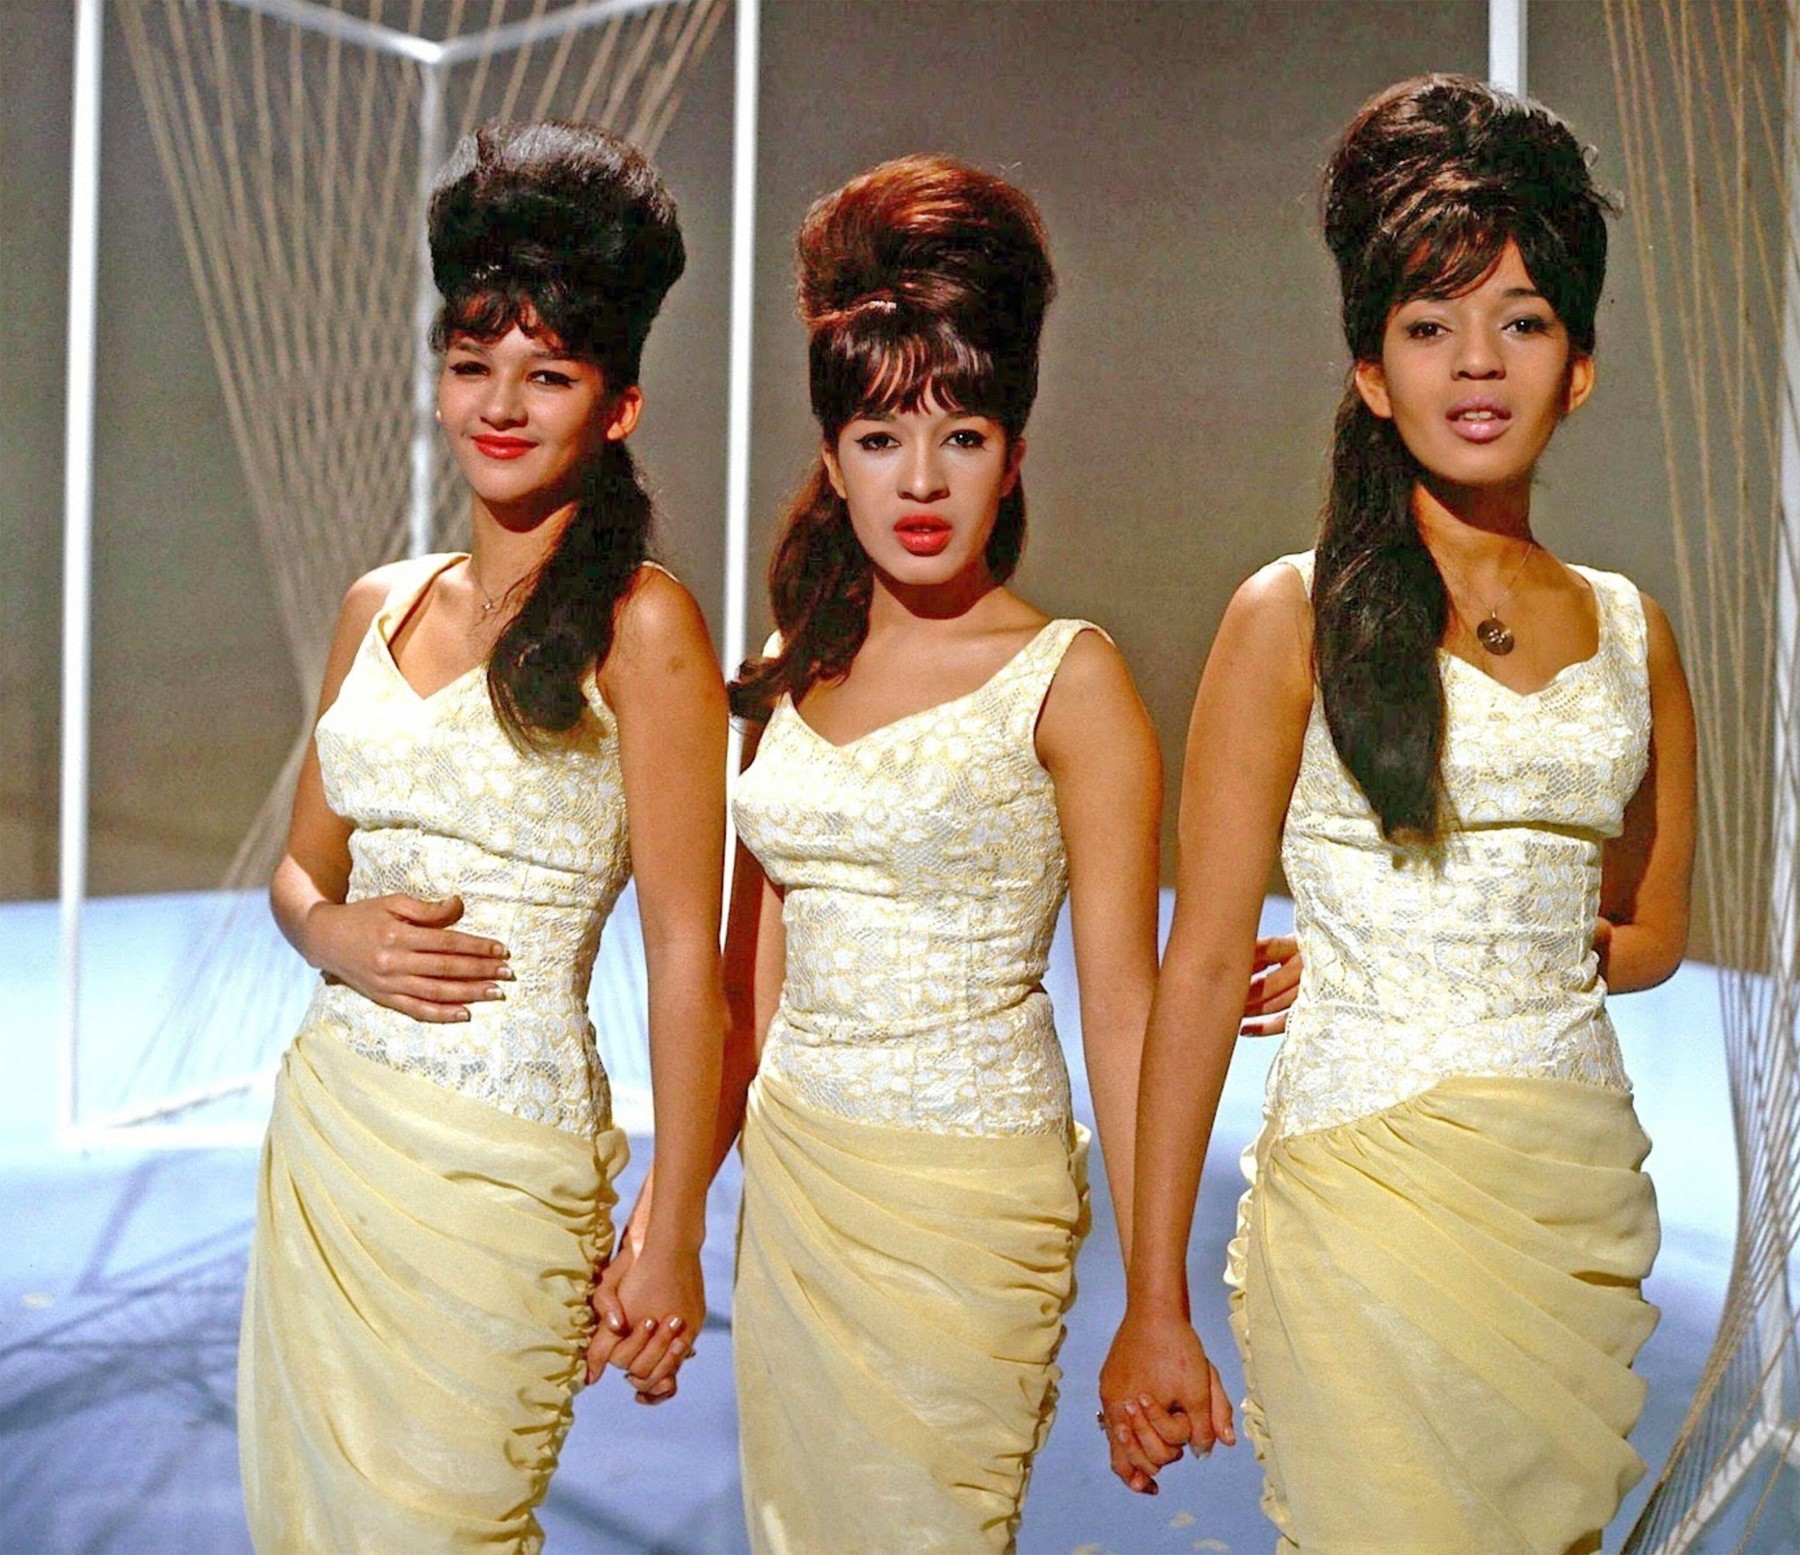 THE RONETTES